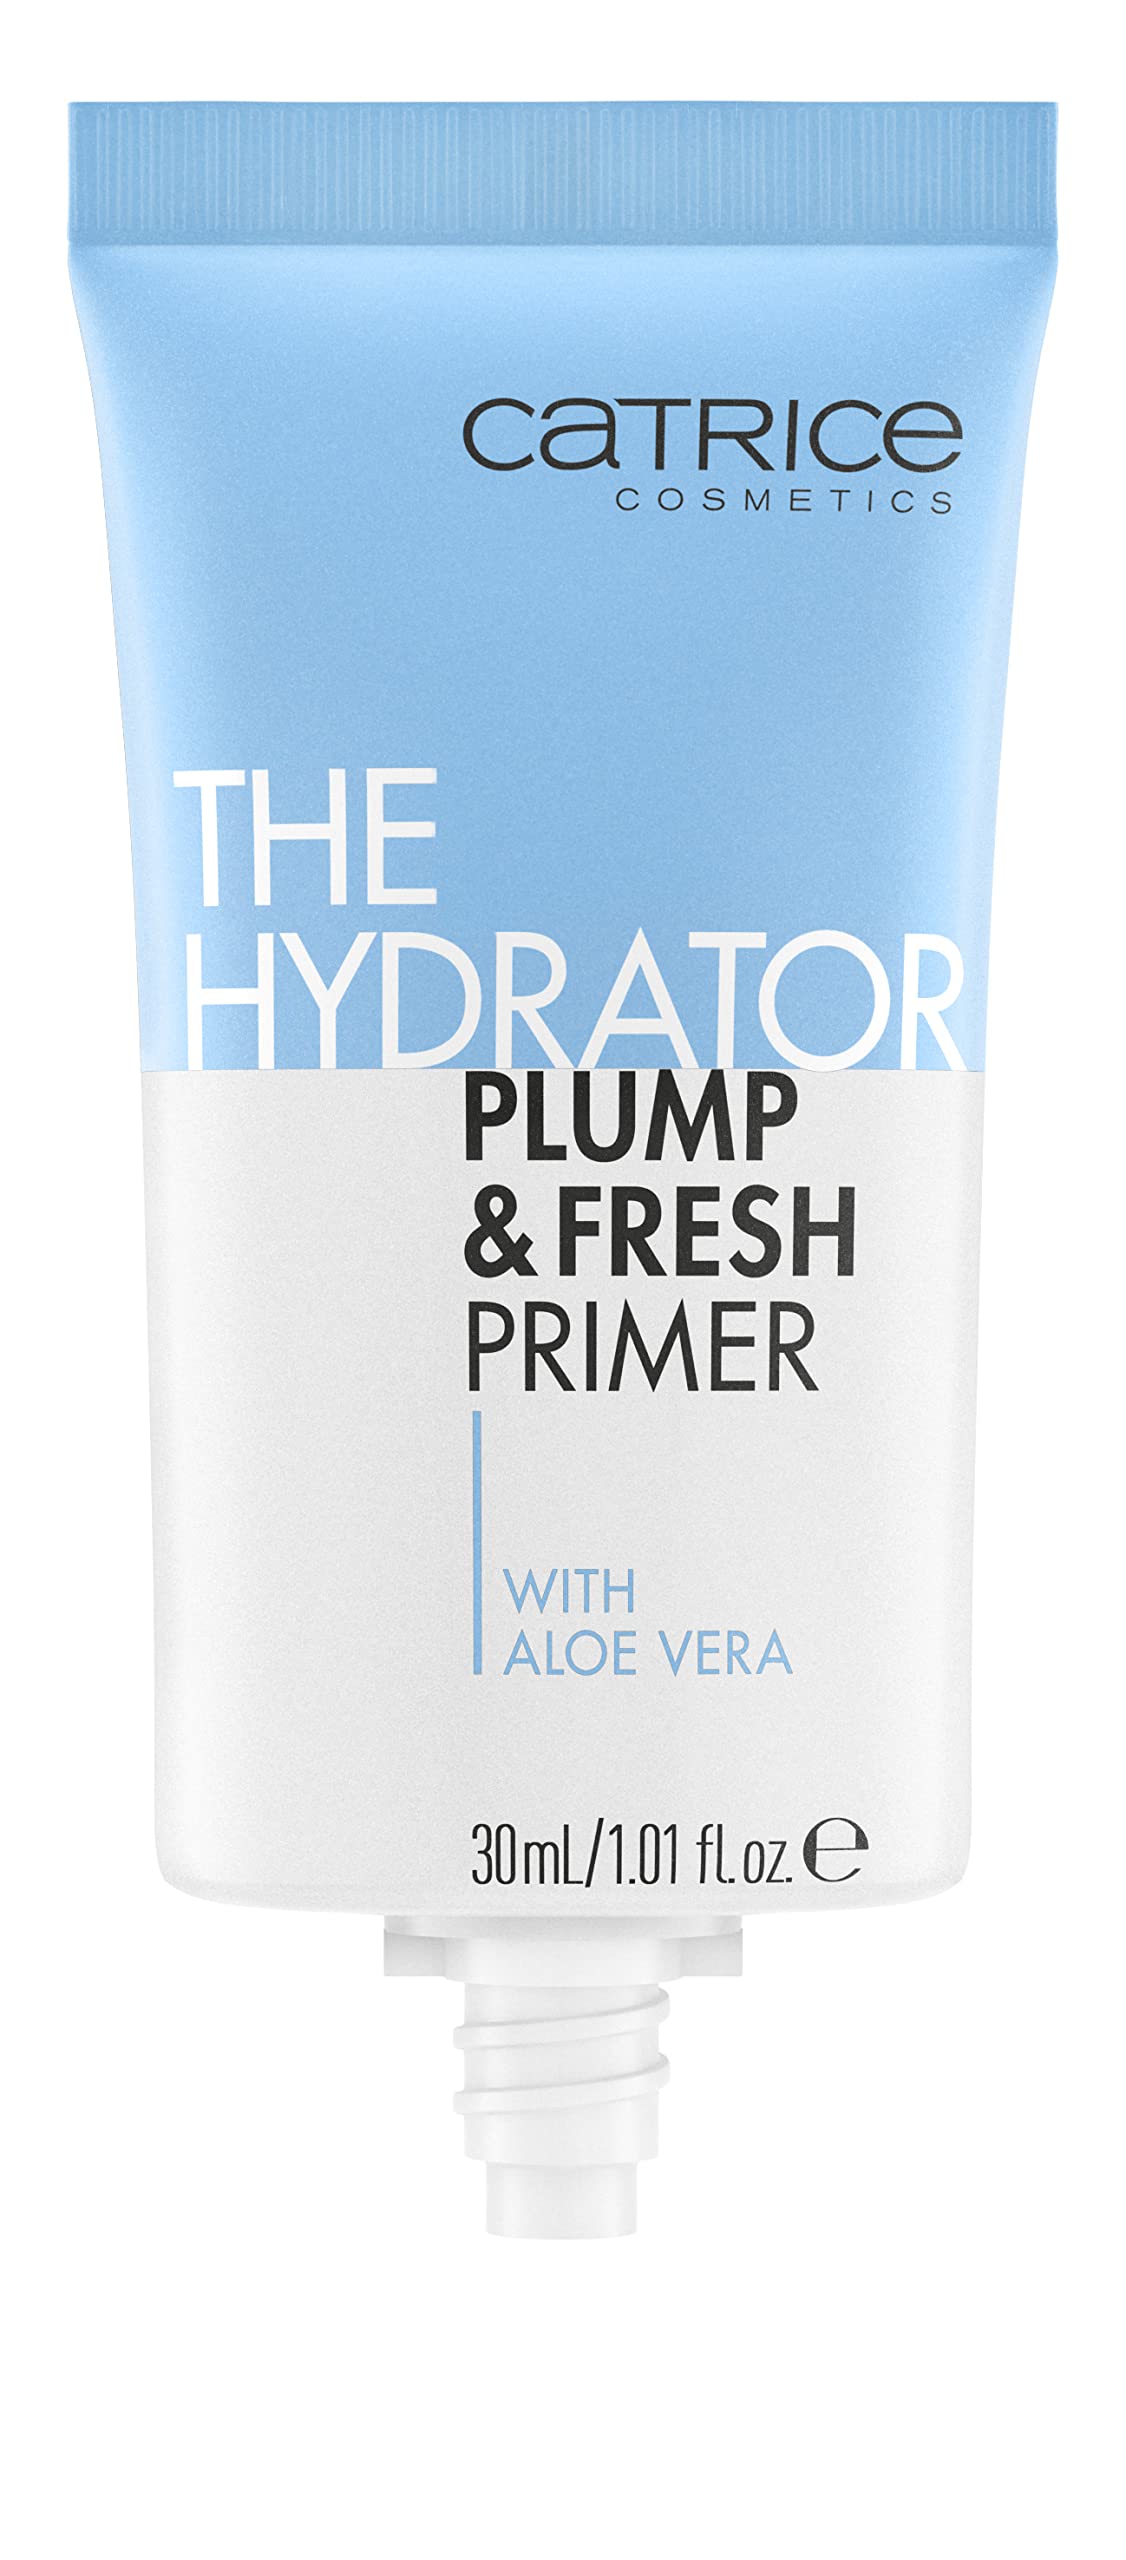 Catrice | The Hydrator Plump & Fresh Primer | Long Lasting, Moisturizing Make Up Base with Aloe Vera | Vegan & Cruelty Free | Made Without Oil, Parabens & Microplastics